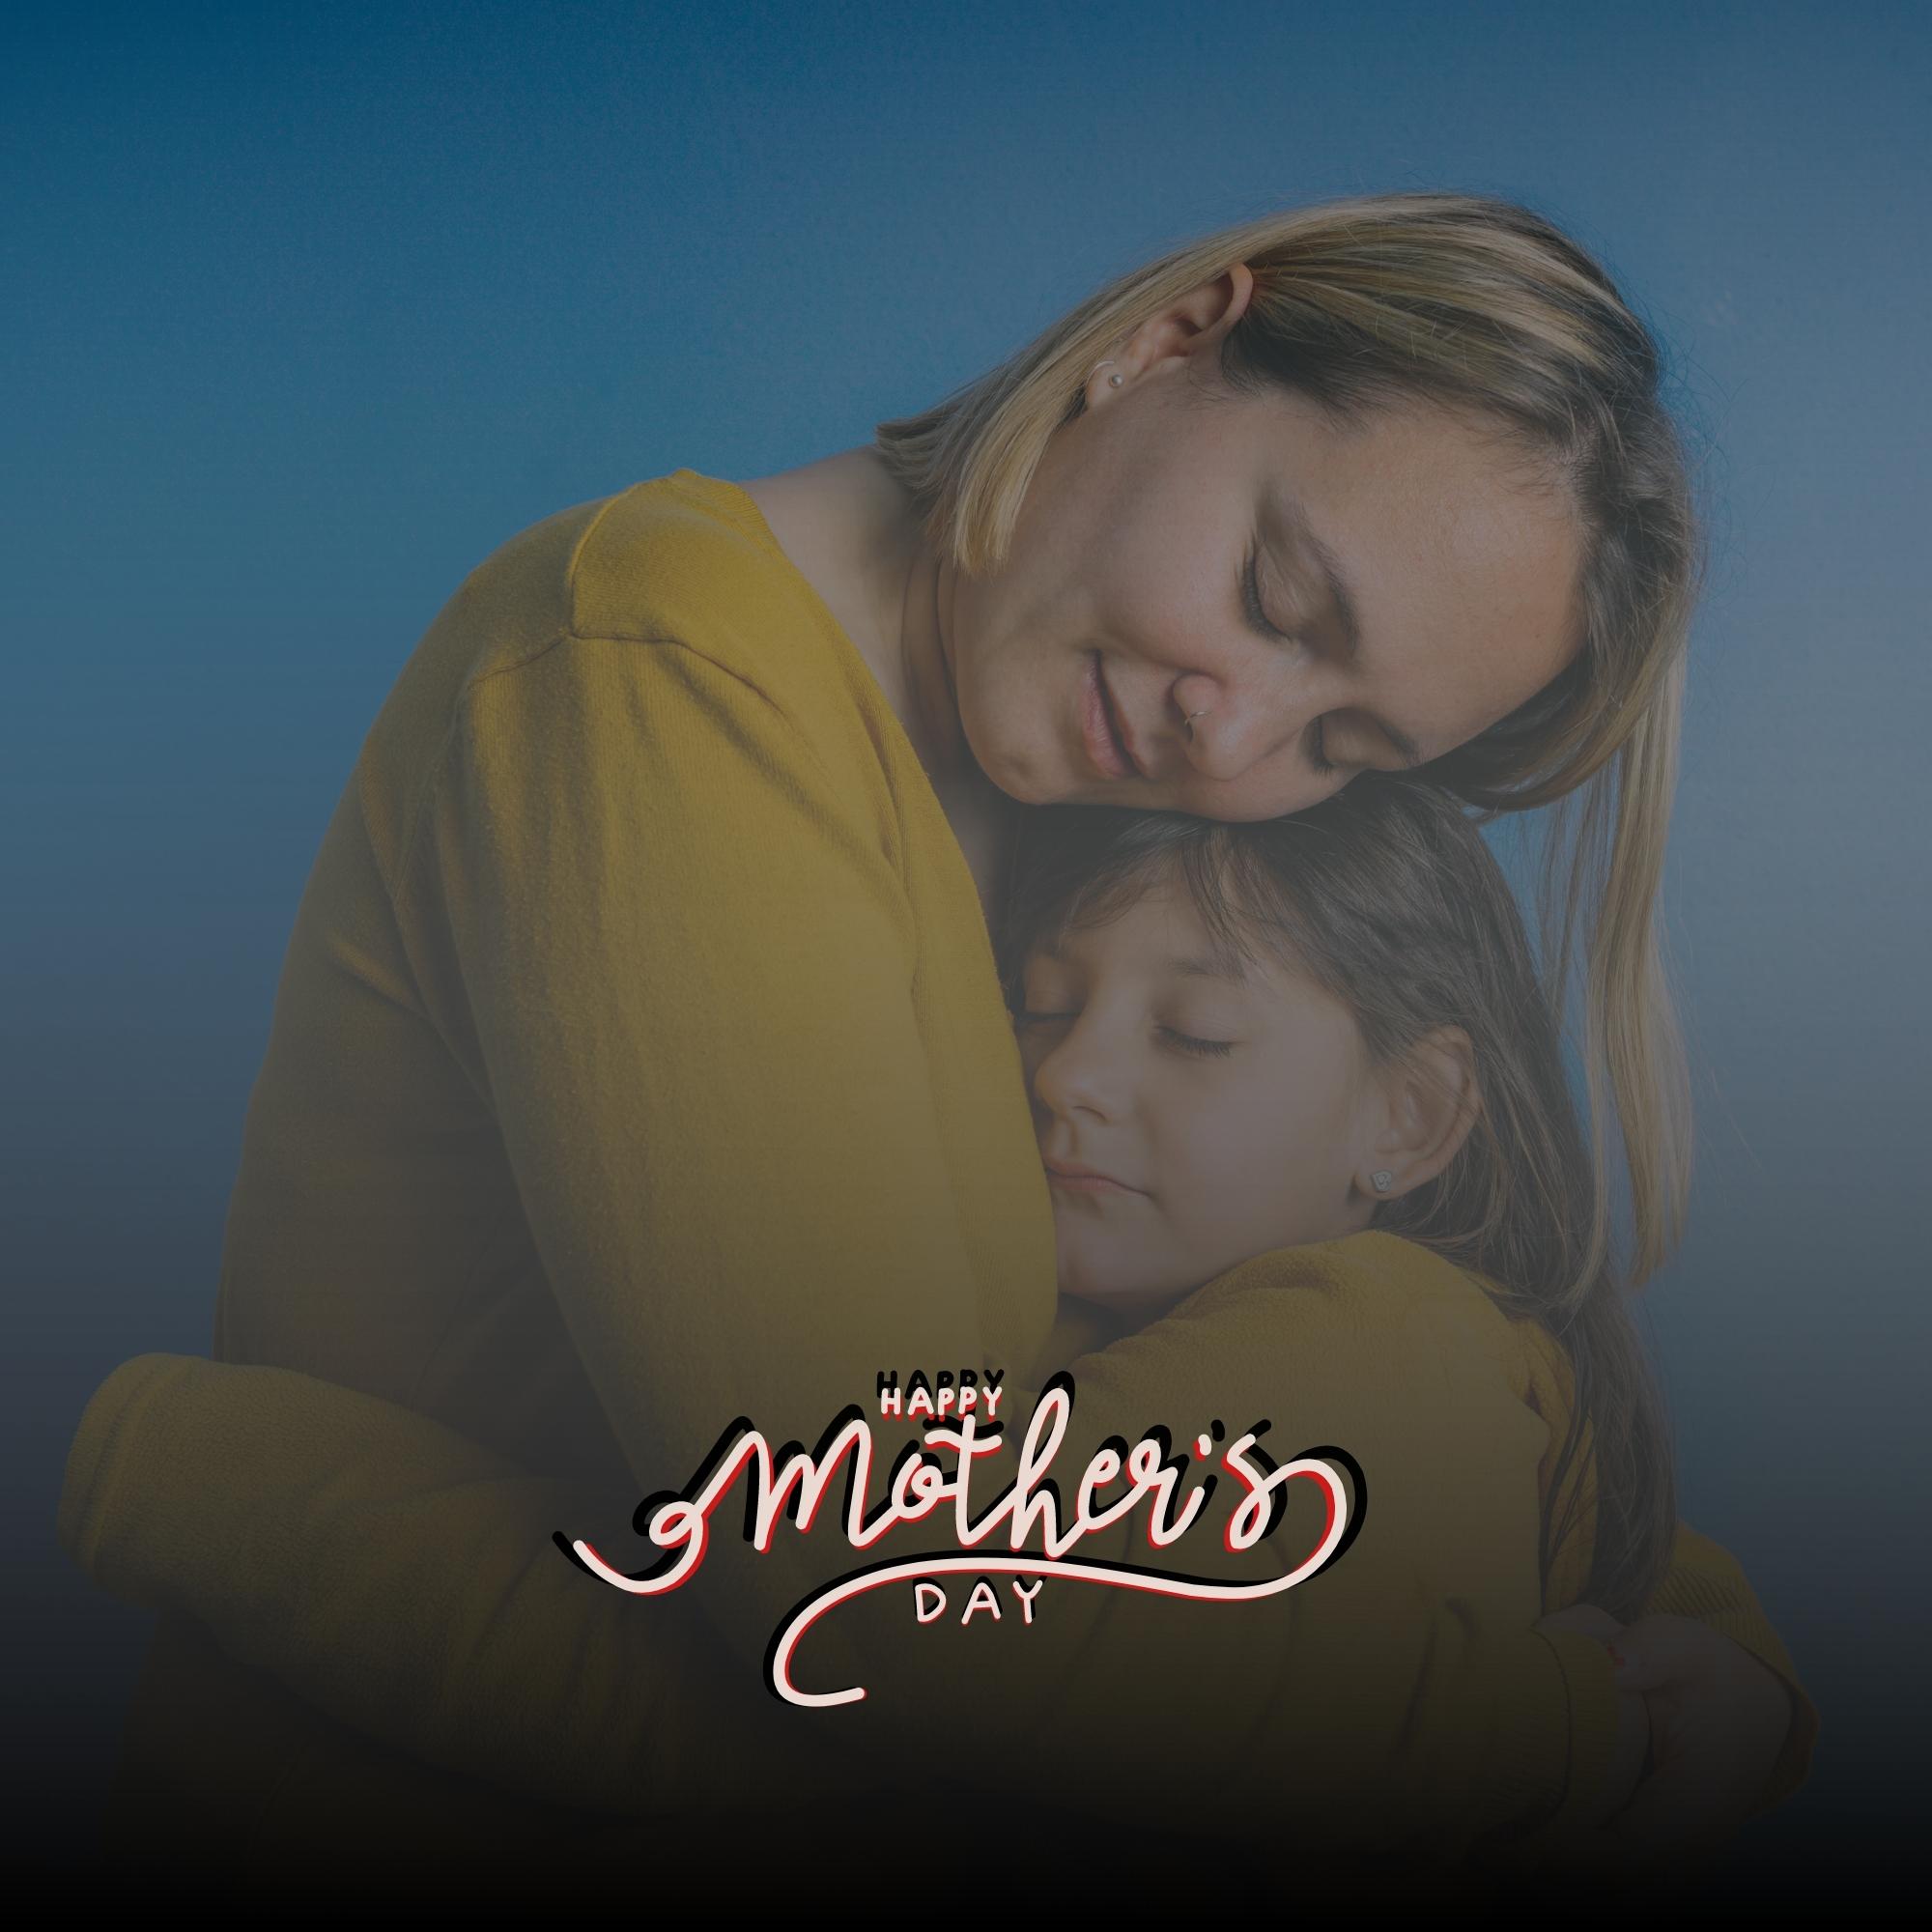 Happy Mothers Day Images | 1046 | Free Download [8k,4k,Hd]